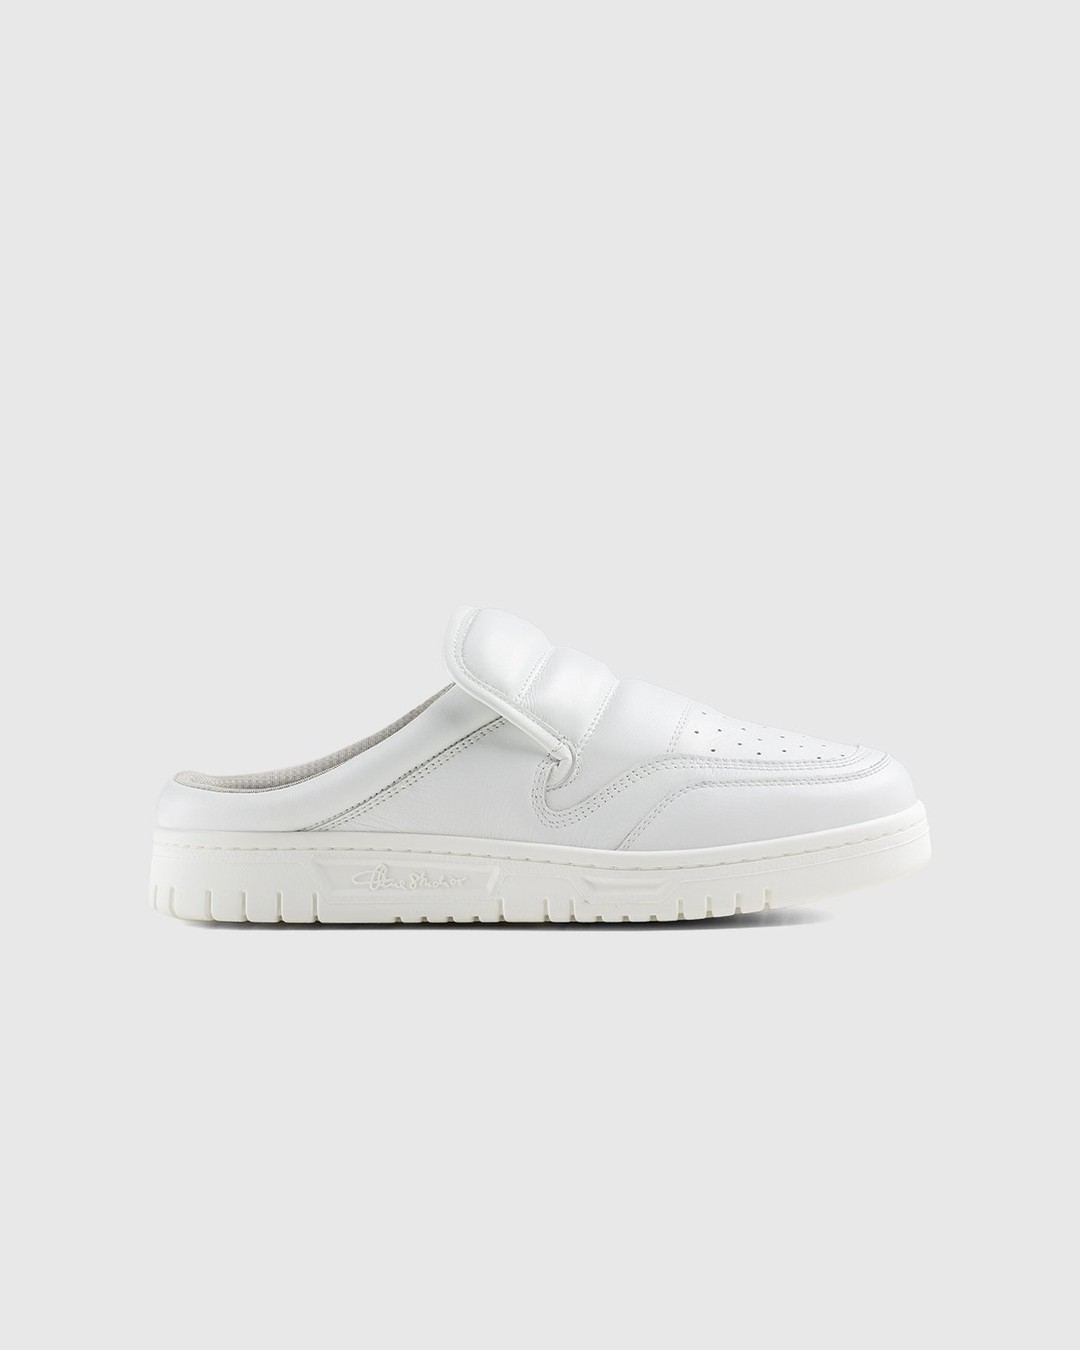 Acne Studios – Cow Leather Mule White - Sneakers - White - Image 1